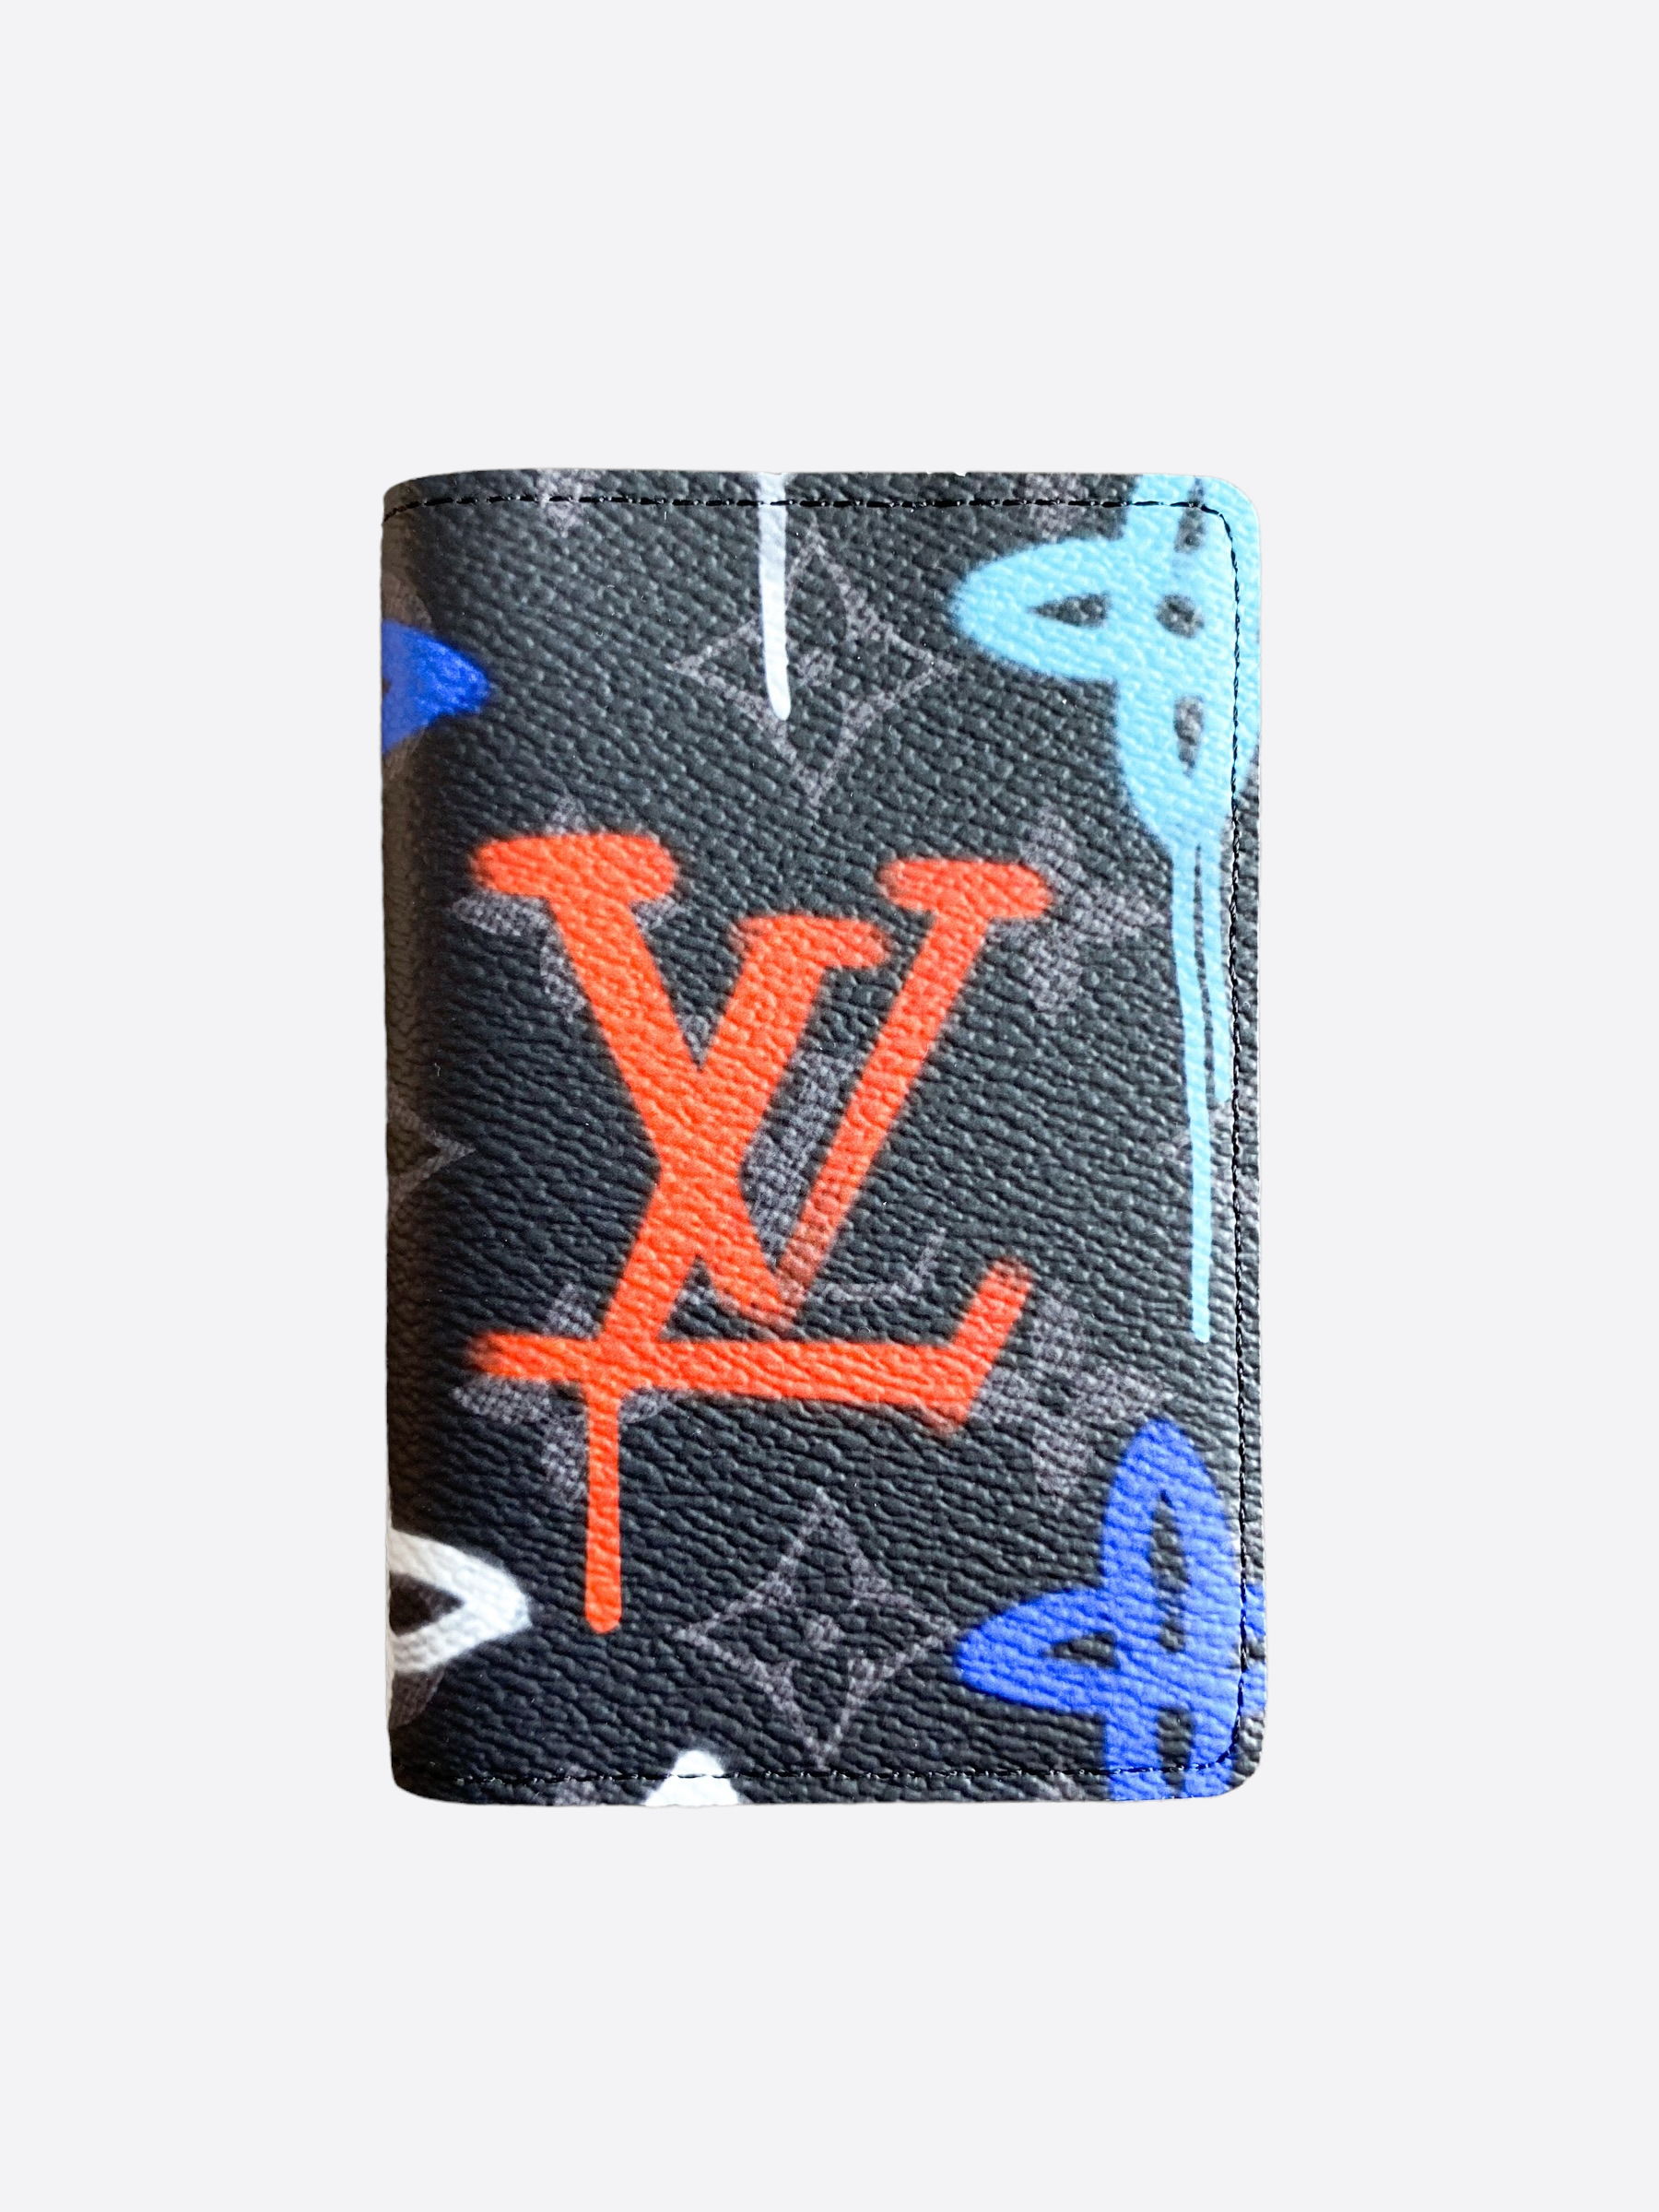 Louis Vuitton special edition mirror collection pocket organizer – Radio  Omega Sca, The best Haitian Radio in Brooklyn